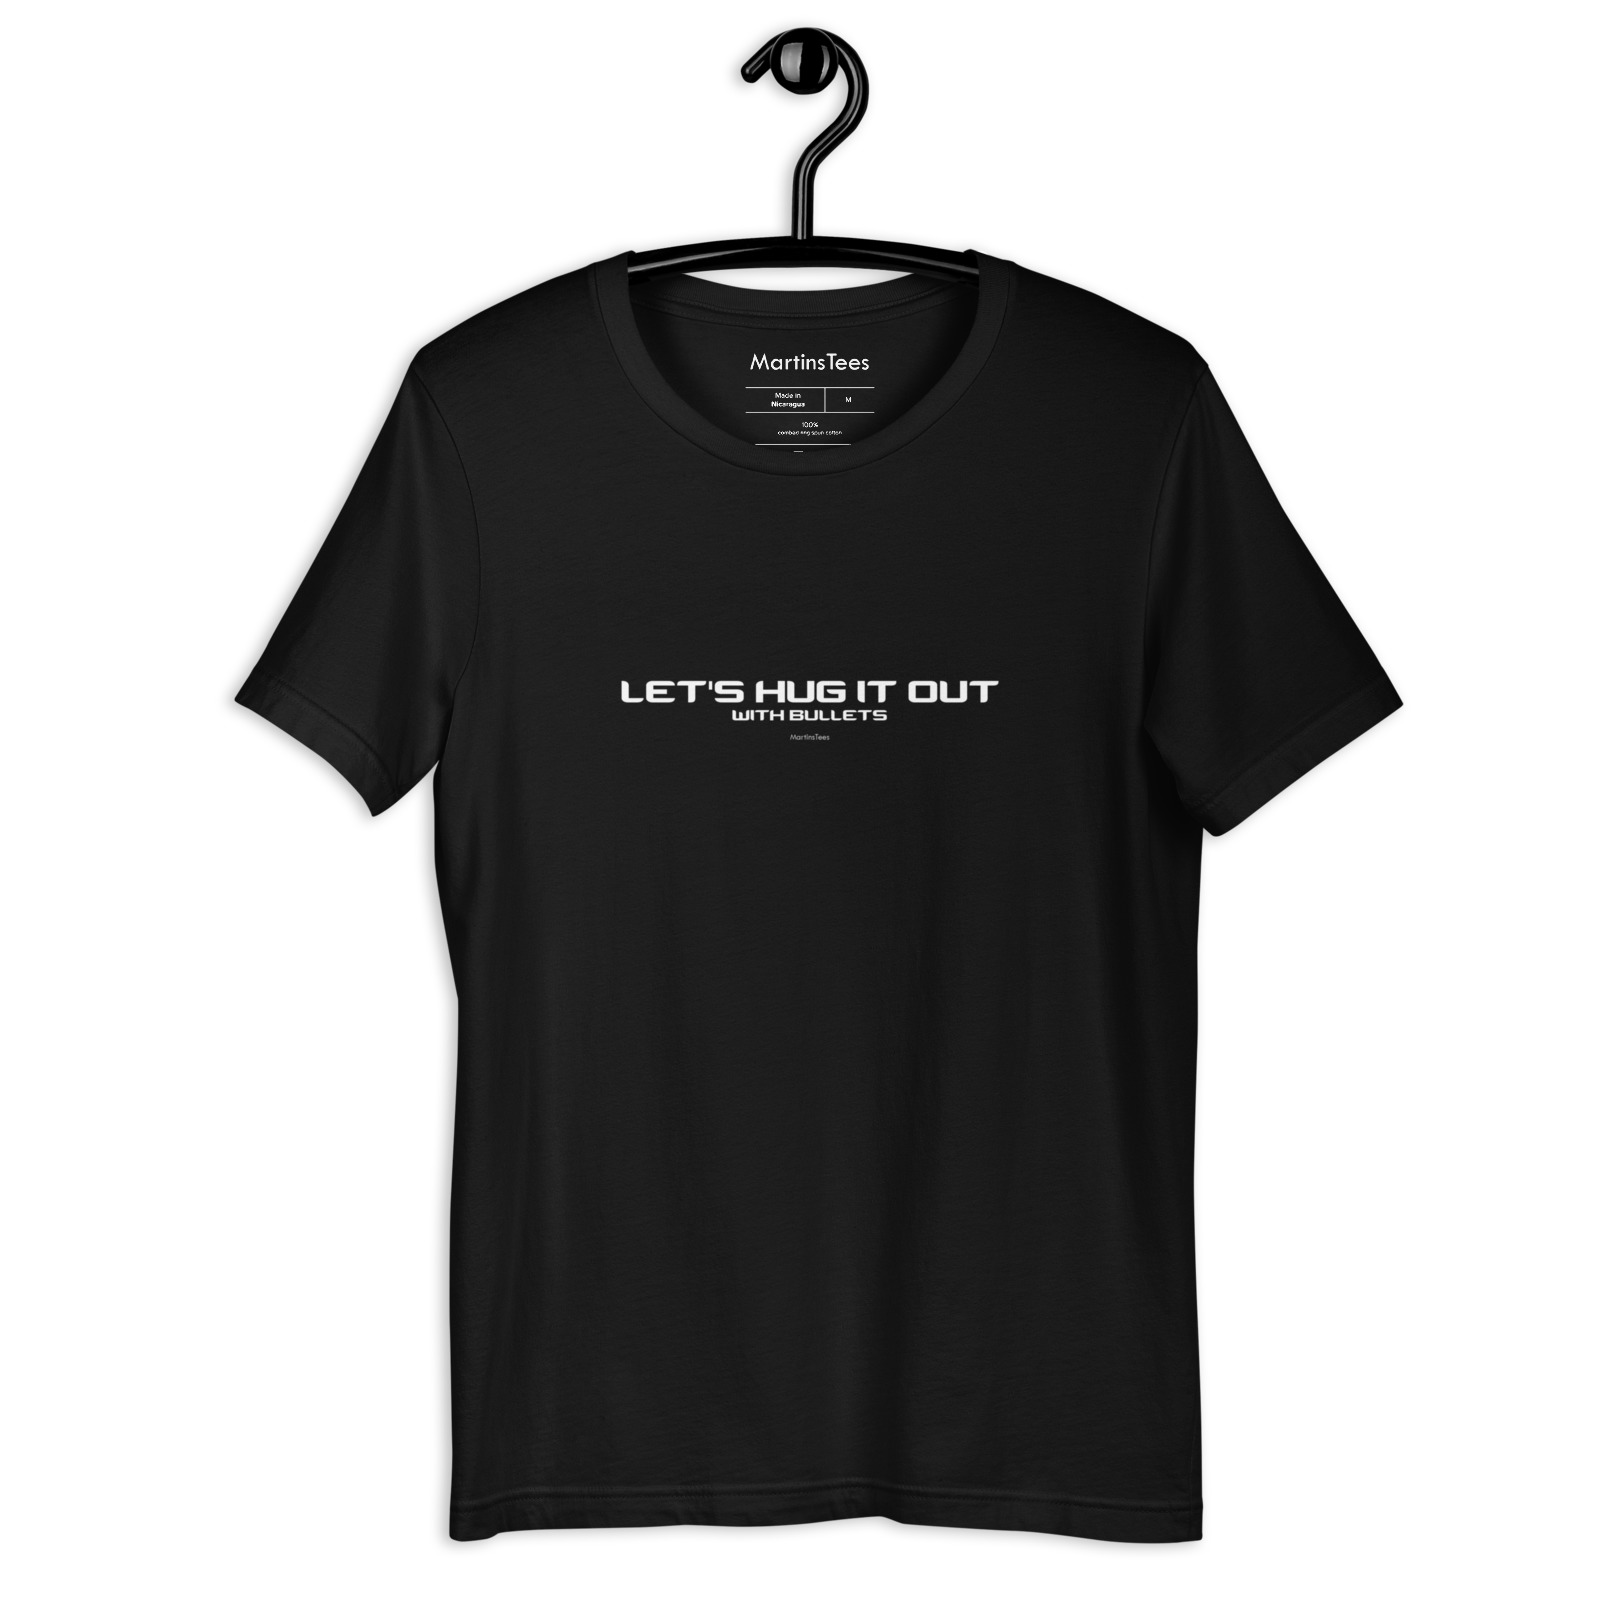 T-shirt: LET'S HUG IT OUT - WITH BULLETS